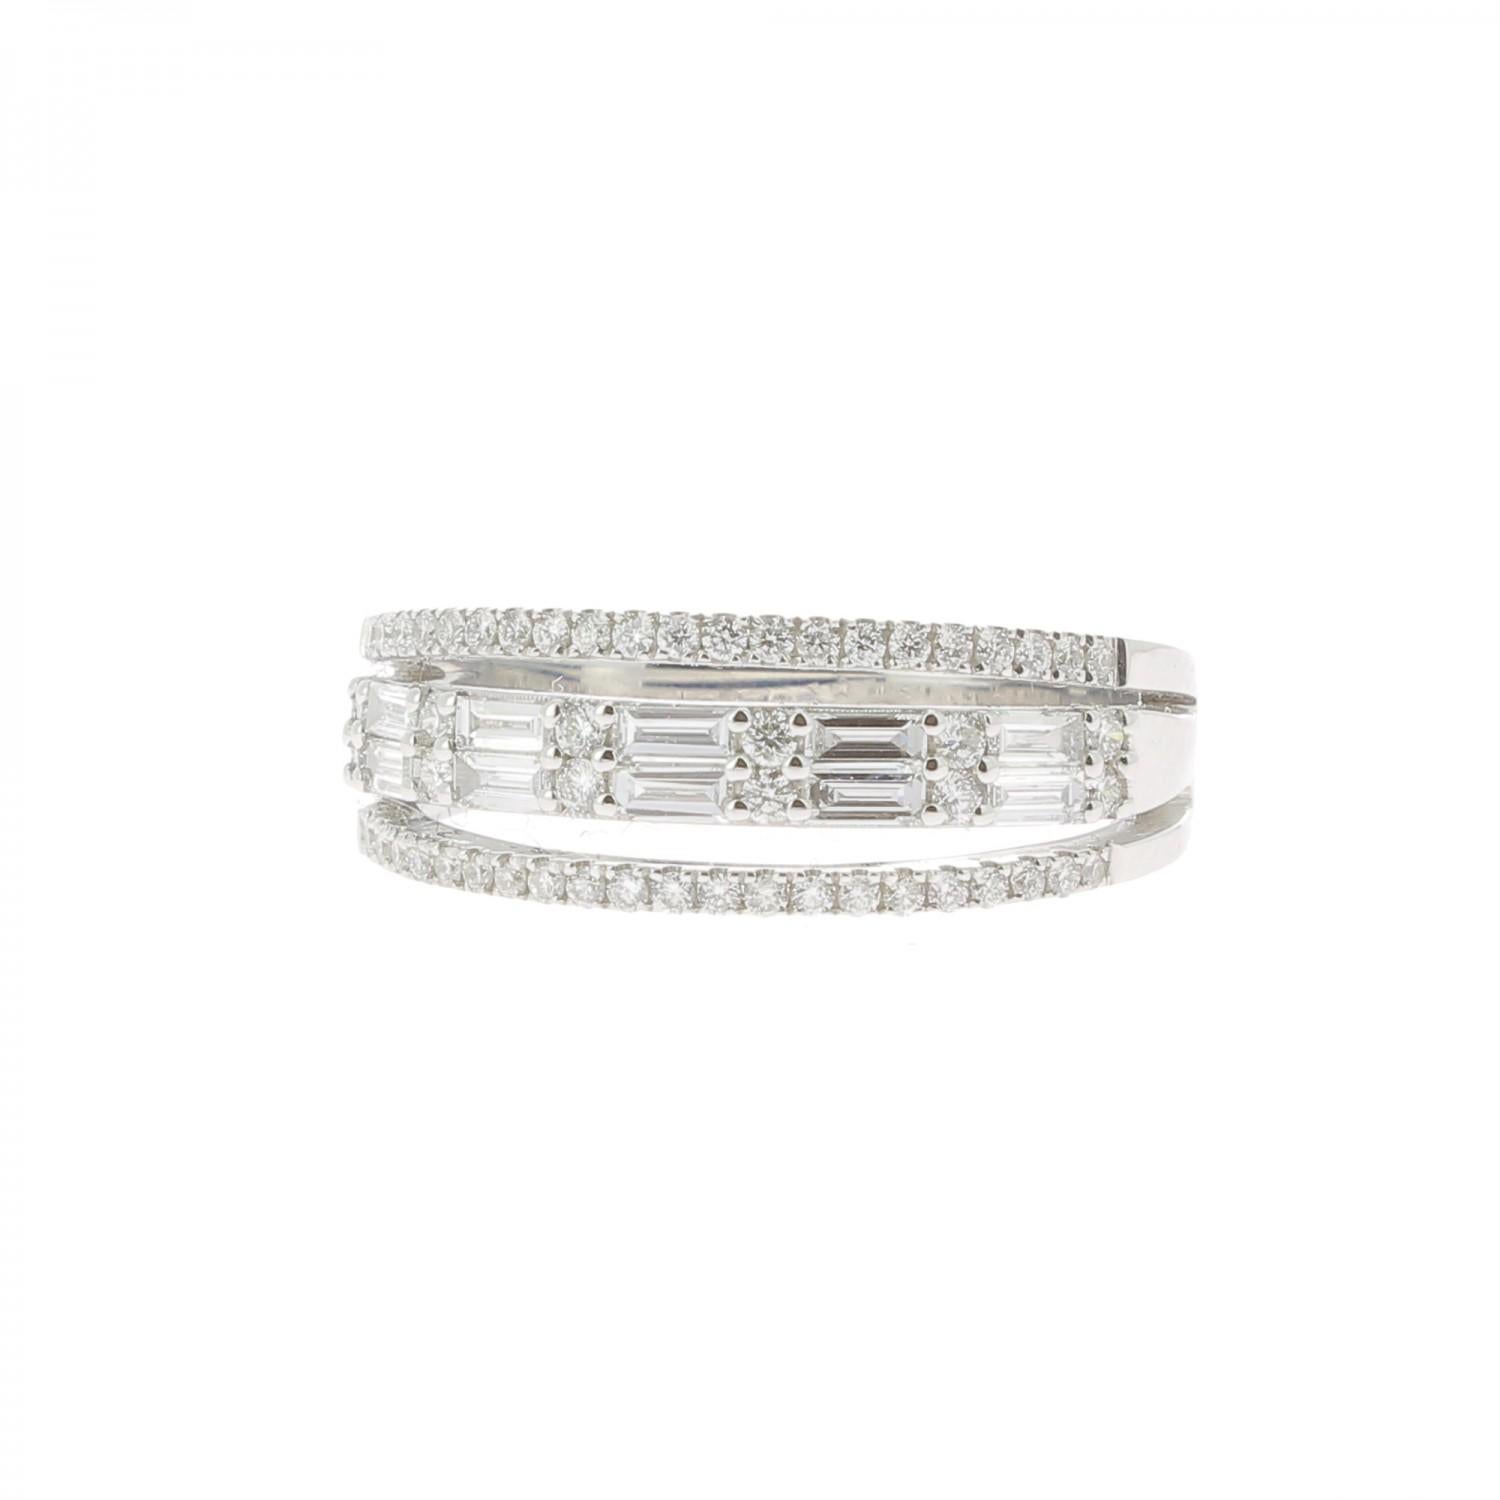 A wonderful Diamond Ring set with 3 row of Round Diamonds and Baguette Diamonds weighing 0,57 Carats.
The Diamonds are GVS quality.
The  Diamond Cocktail Ring is in 18K White Gold.
The ring weight 4,48 Grams.
The ring size is 6 ½ US and can be size.
